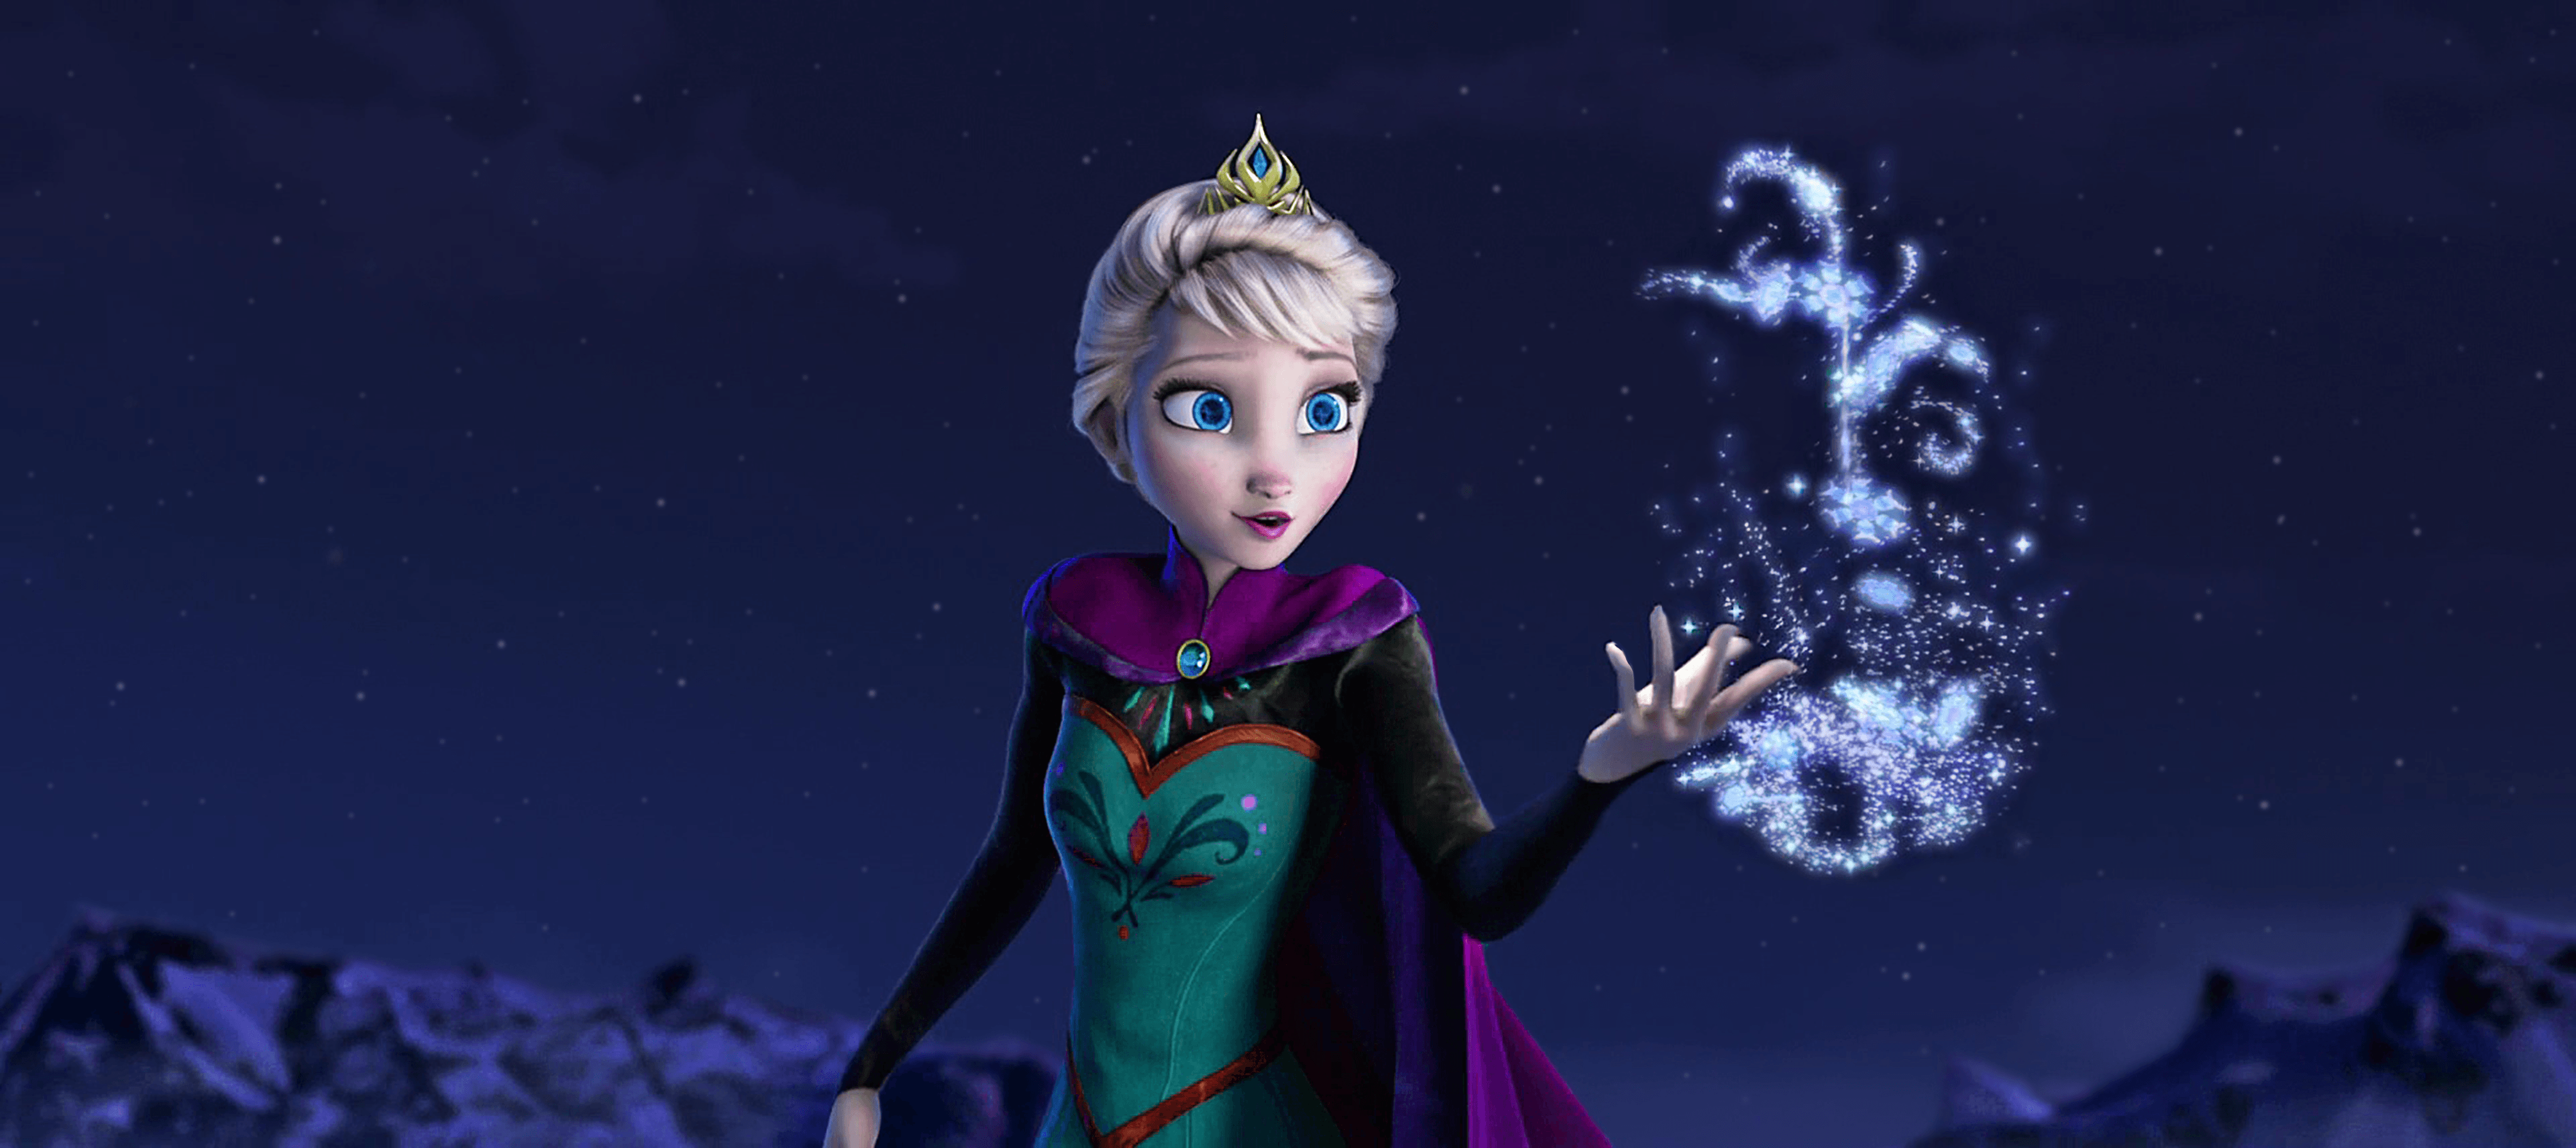 4K Let It Go! (Took me 2 hours to make)